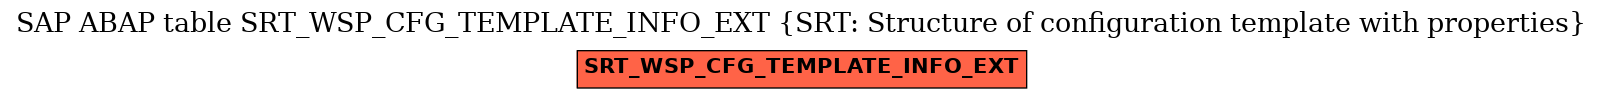 E-R Diagram for table SRT_WSP_CFG_TEMPLATE_INFO_EXT (SRT: Structure of configuration template with properties)